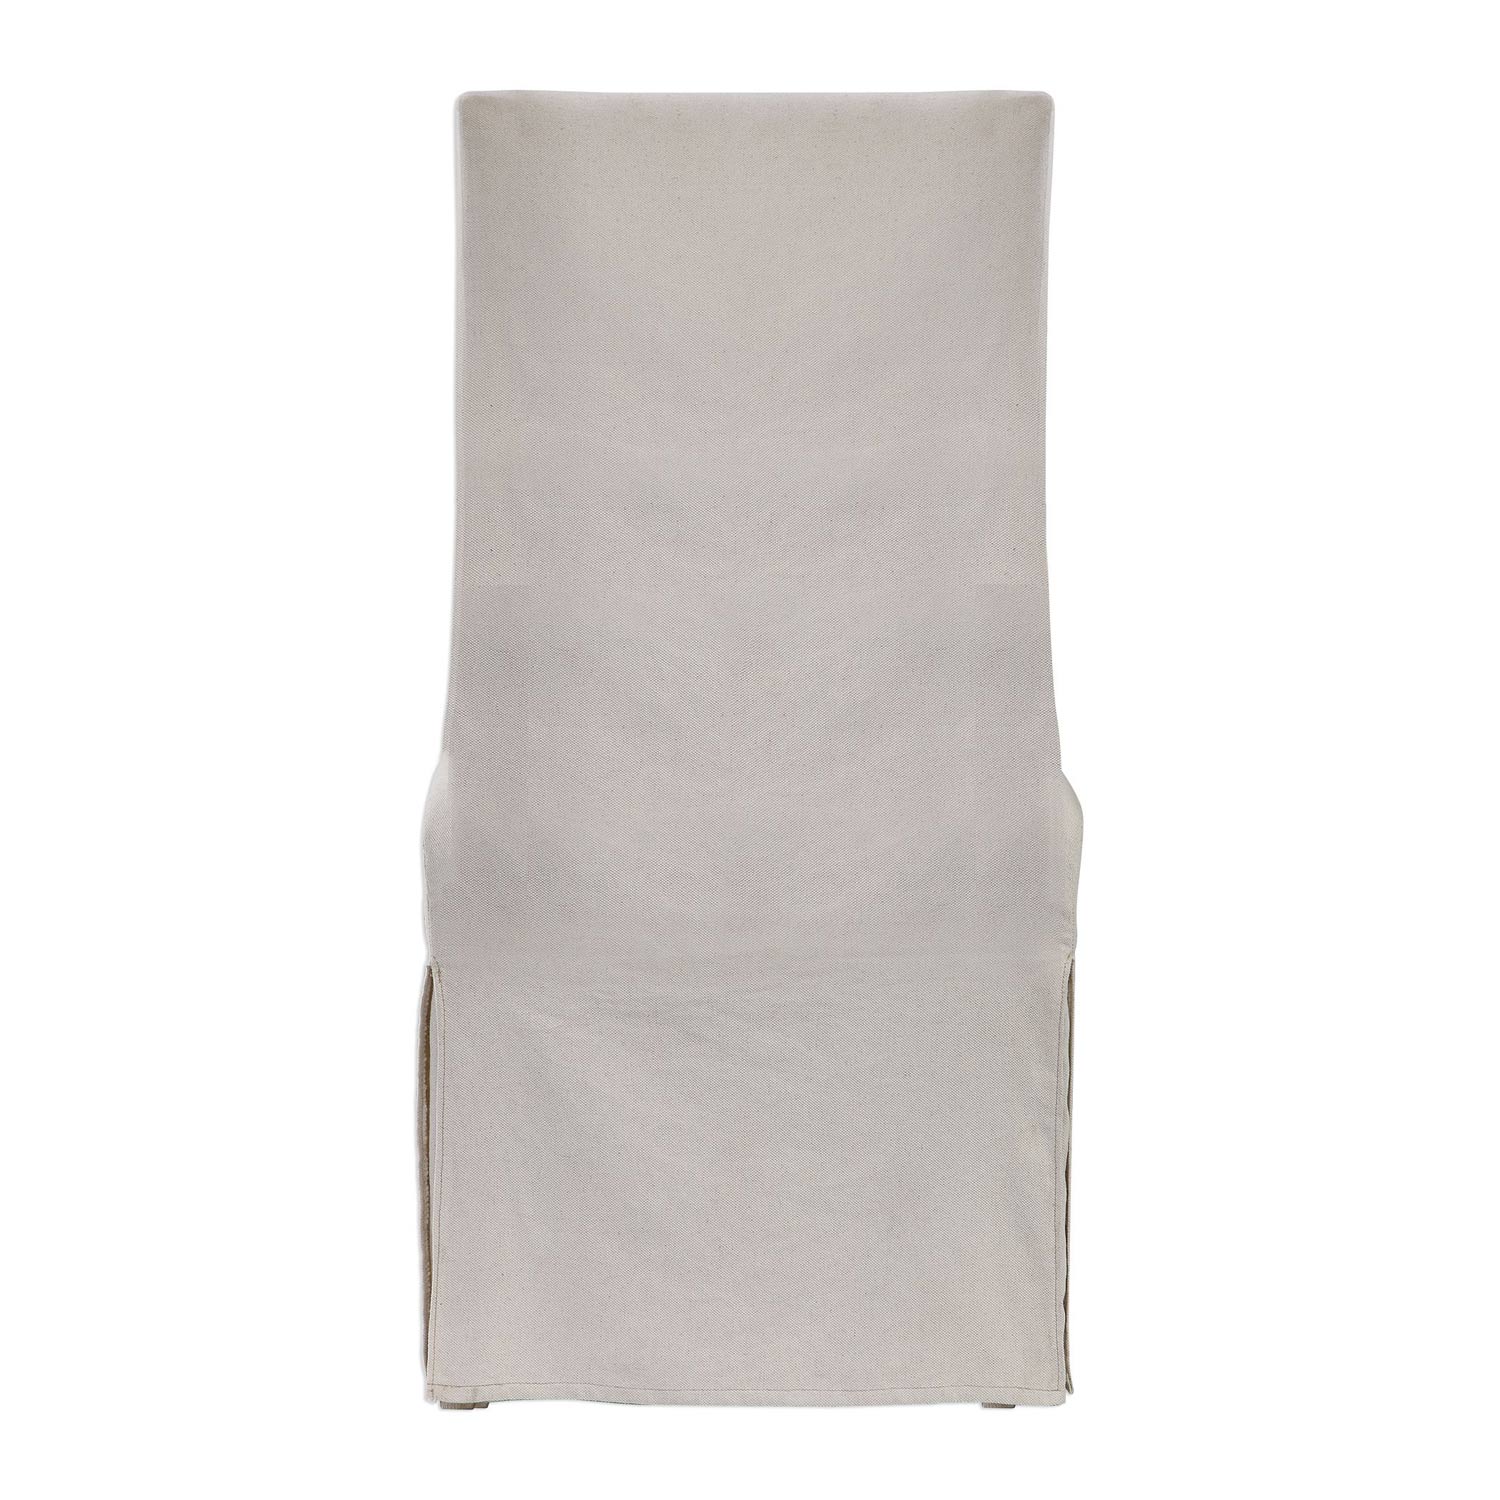 Uttermost Coley Armless Chair - White Linen